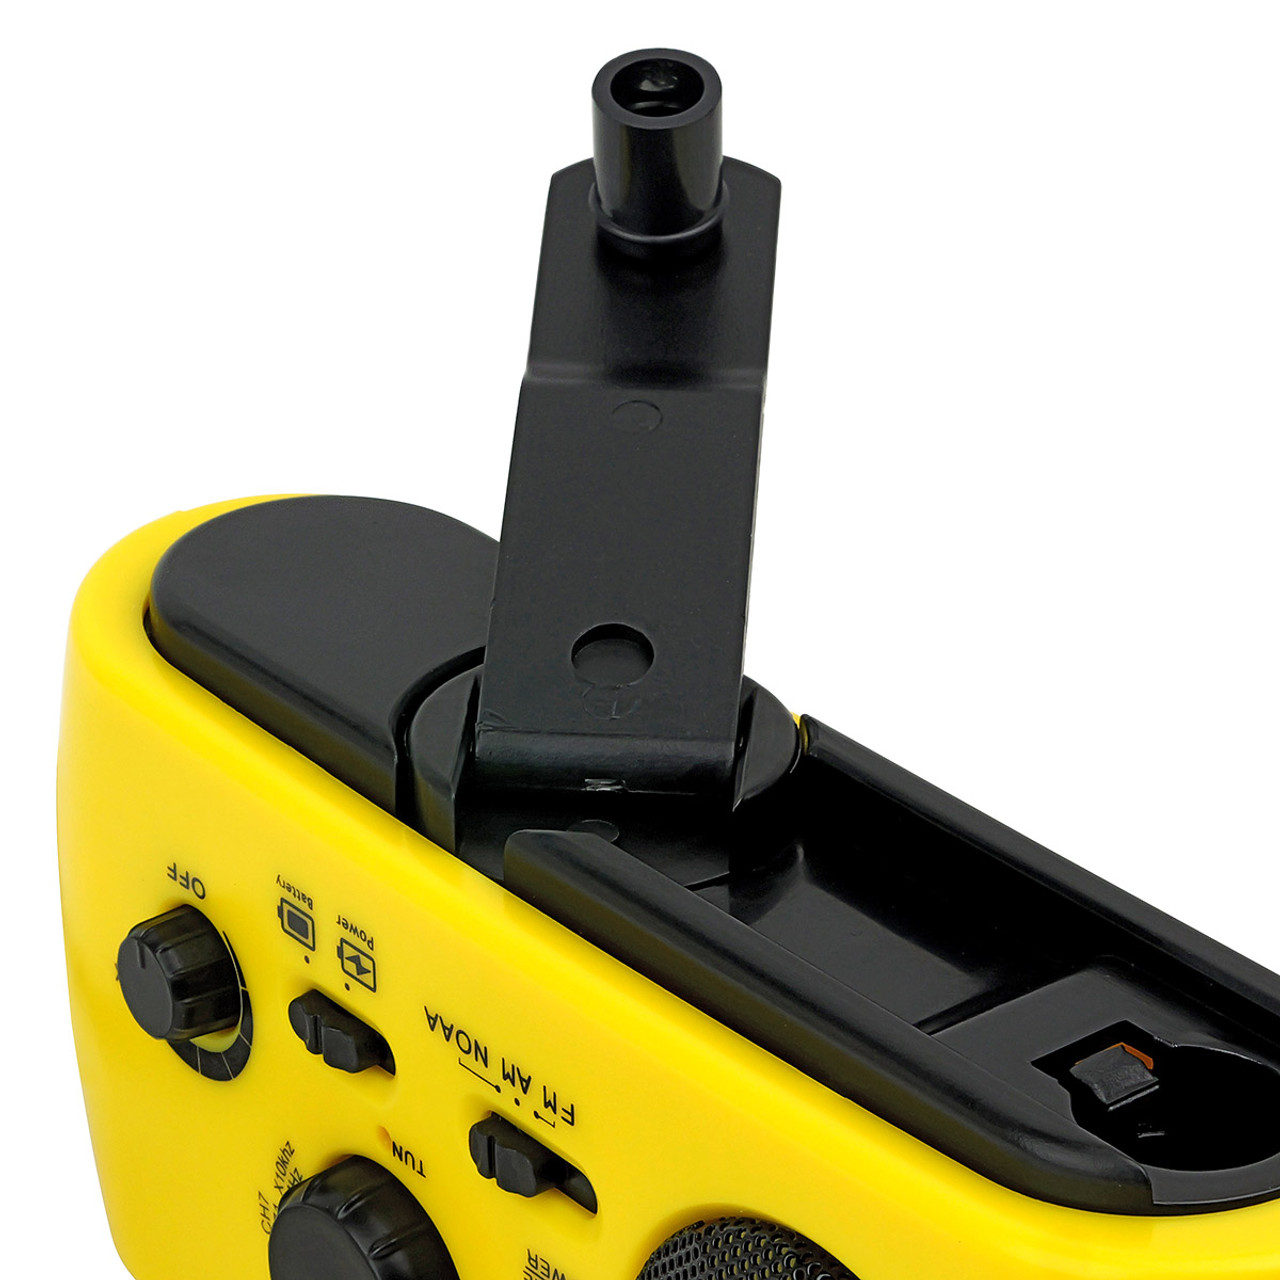 Kaito KA339 Dynamo Solar Powered AM/FM Radio With Solar Panel and Charge  out Feature (Yellow)